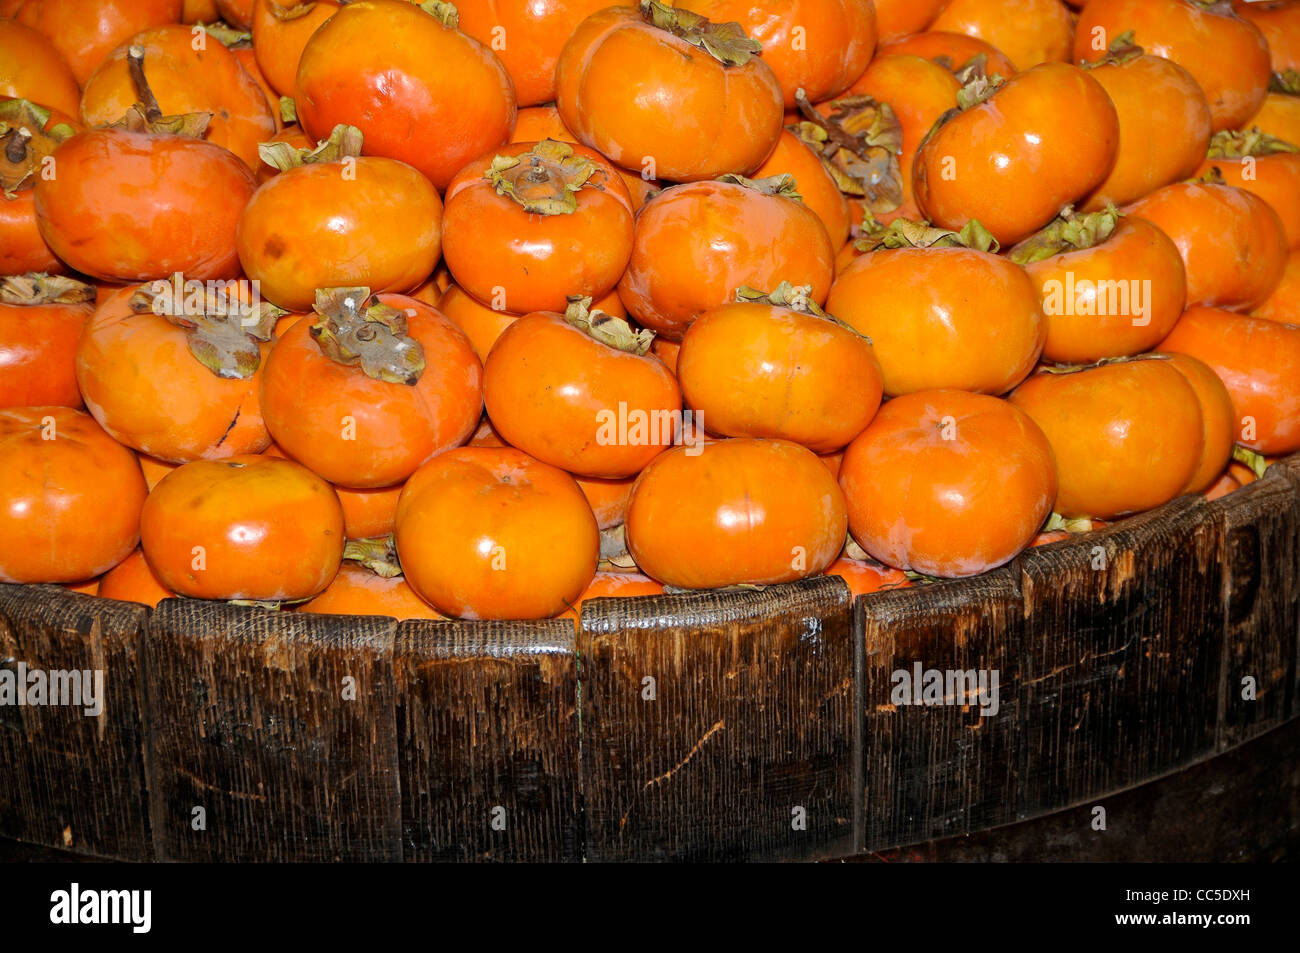 Fuyu Persimmons in Wooden Barrel Stock Photo